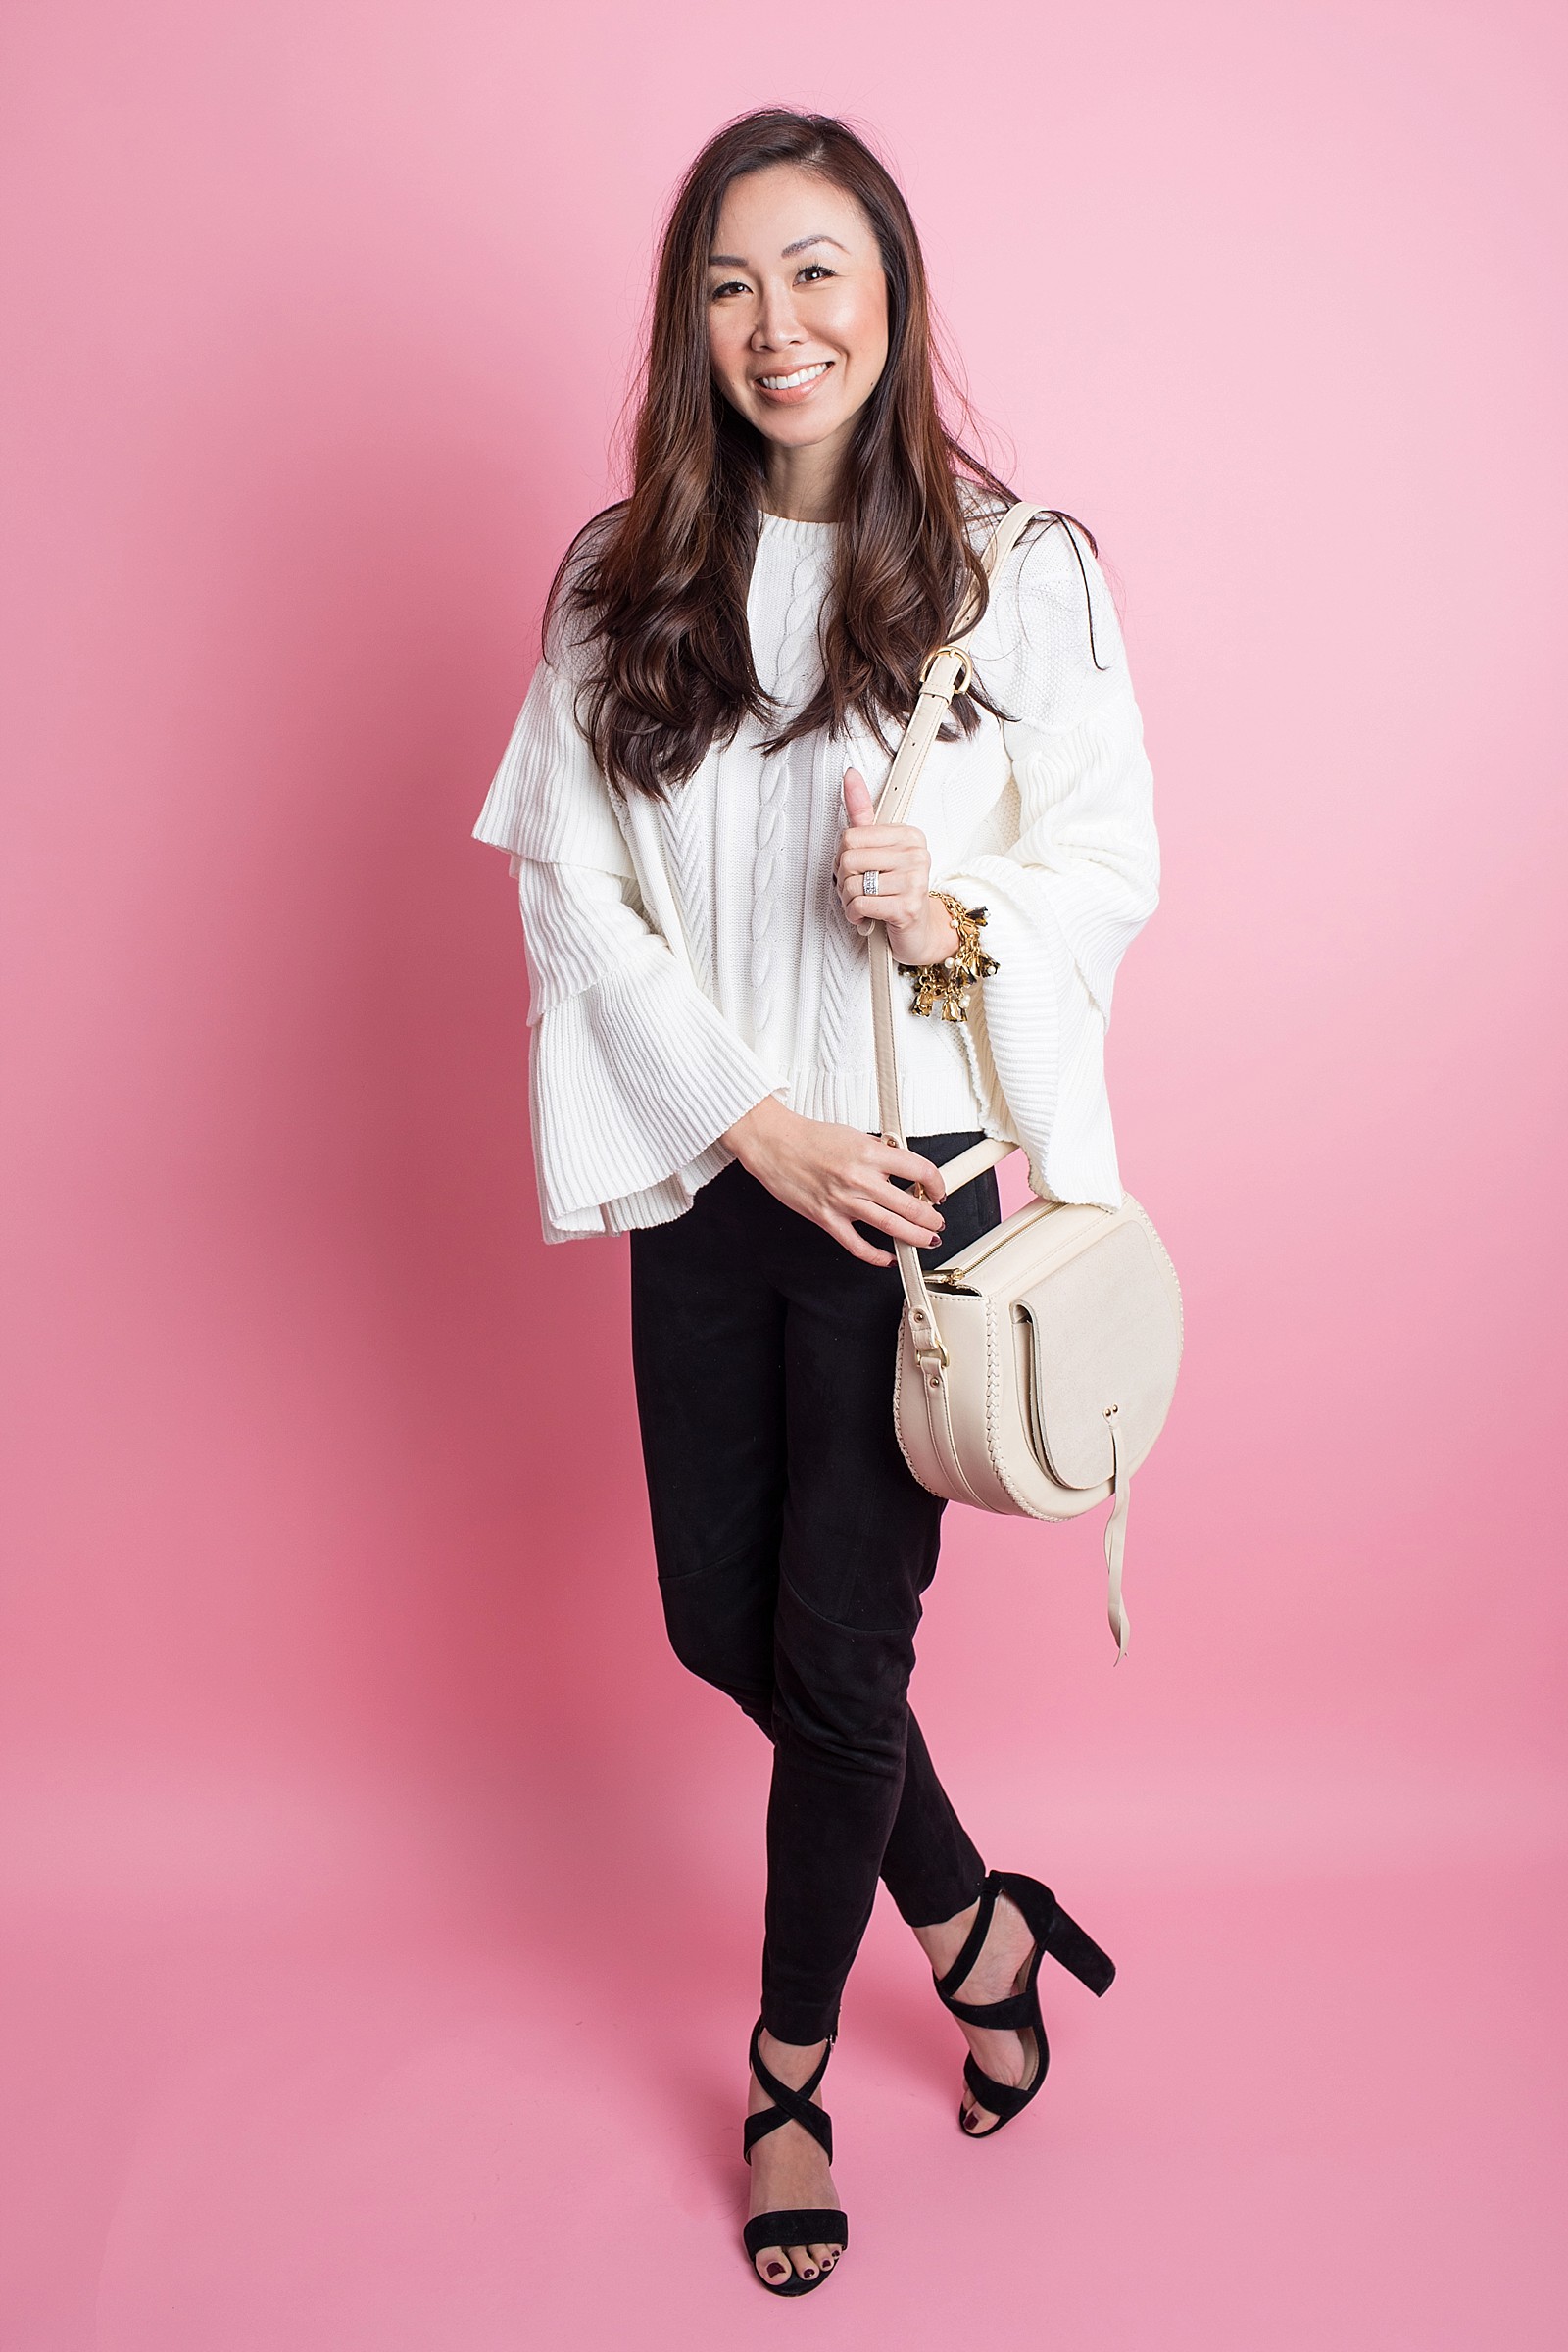 fashion blogger phoenix diana Elizabeth neutral outfit ruffled top sleeves